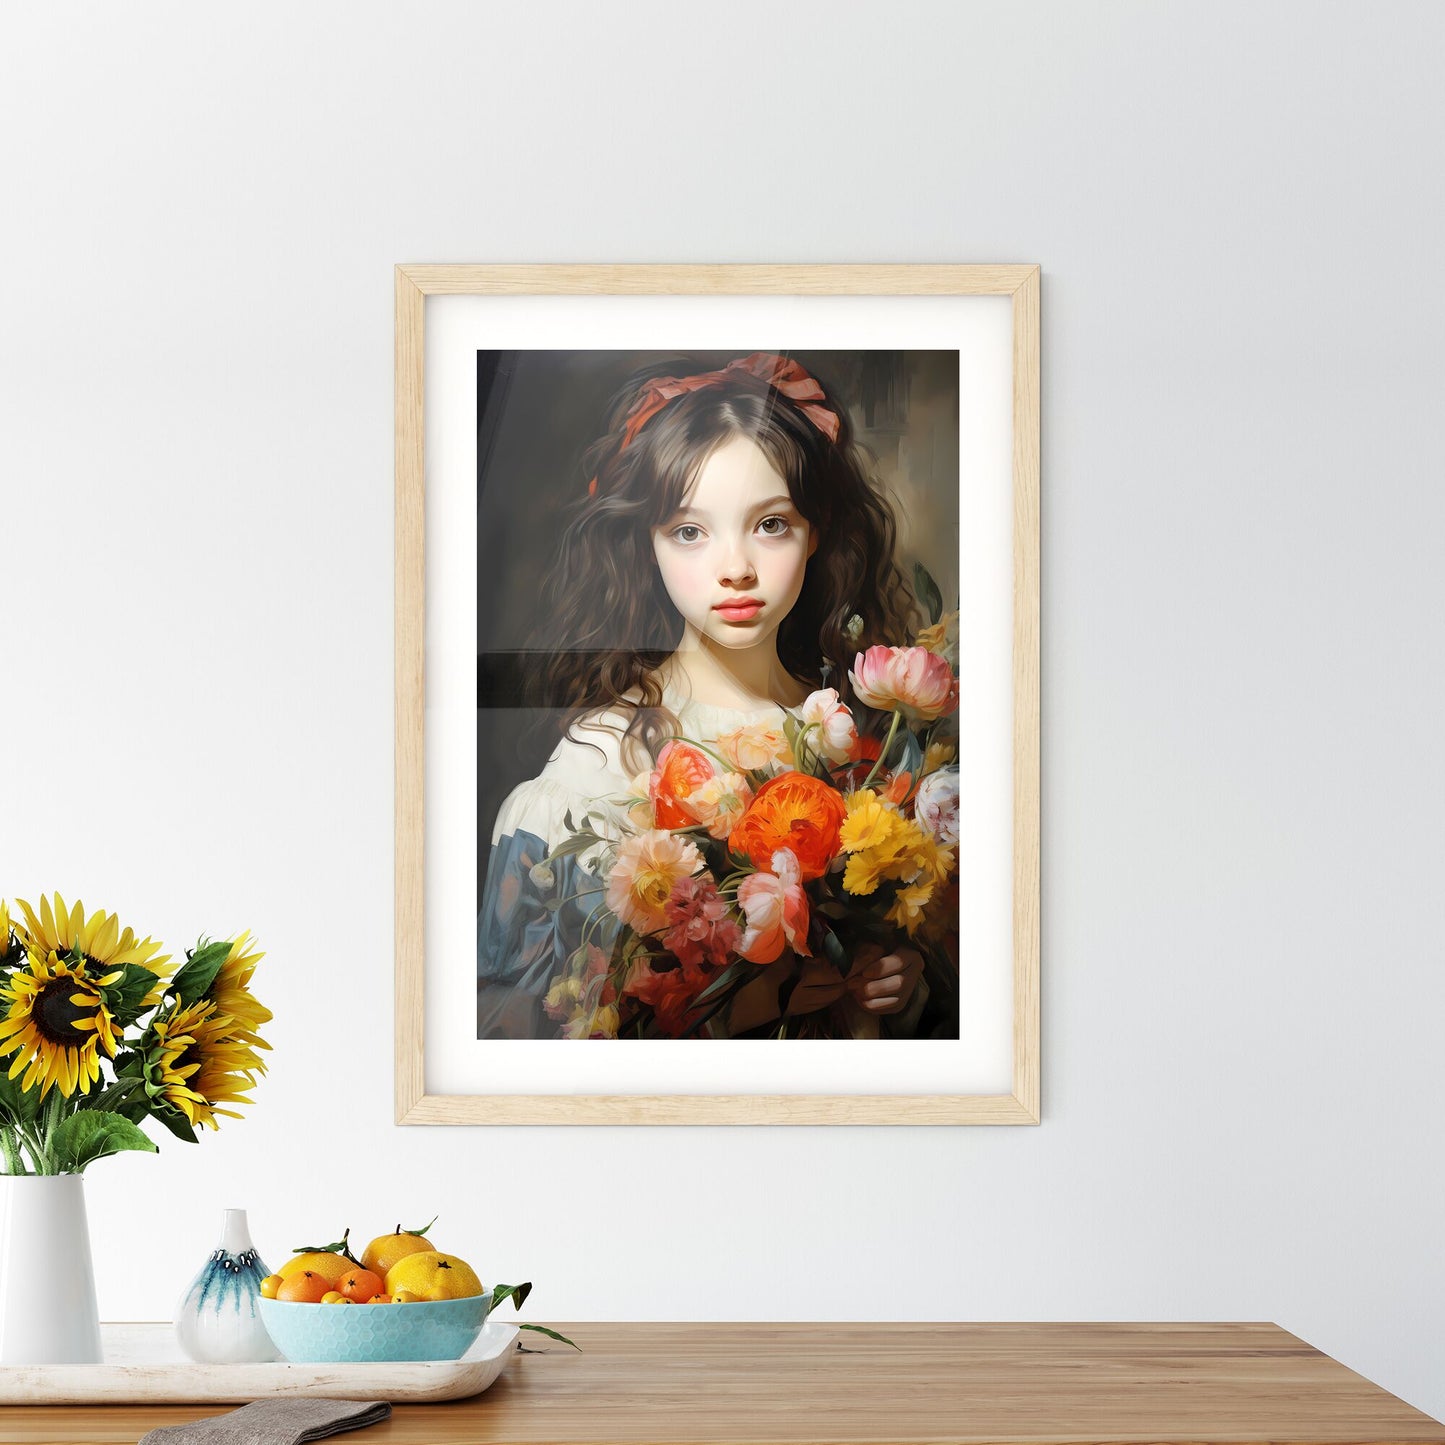 The Young Girl With A Bouquet Of Flowers - A Girl Holding Flowers Default Title